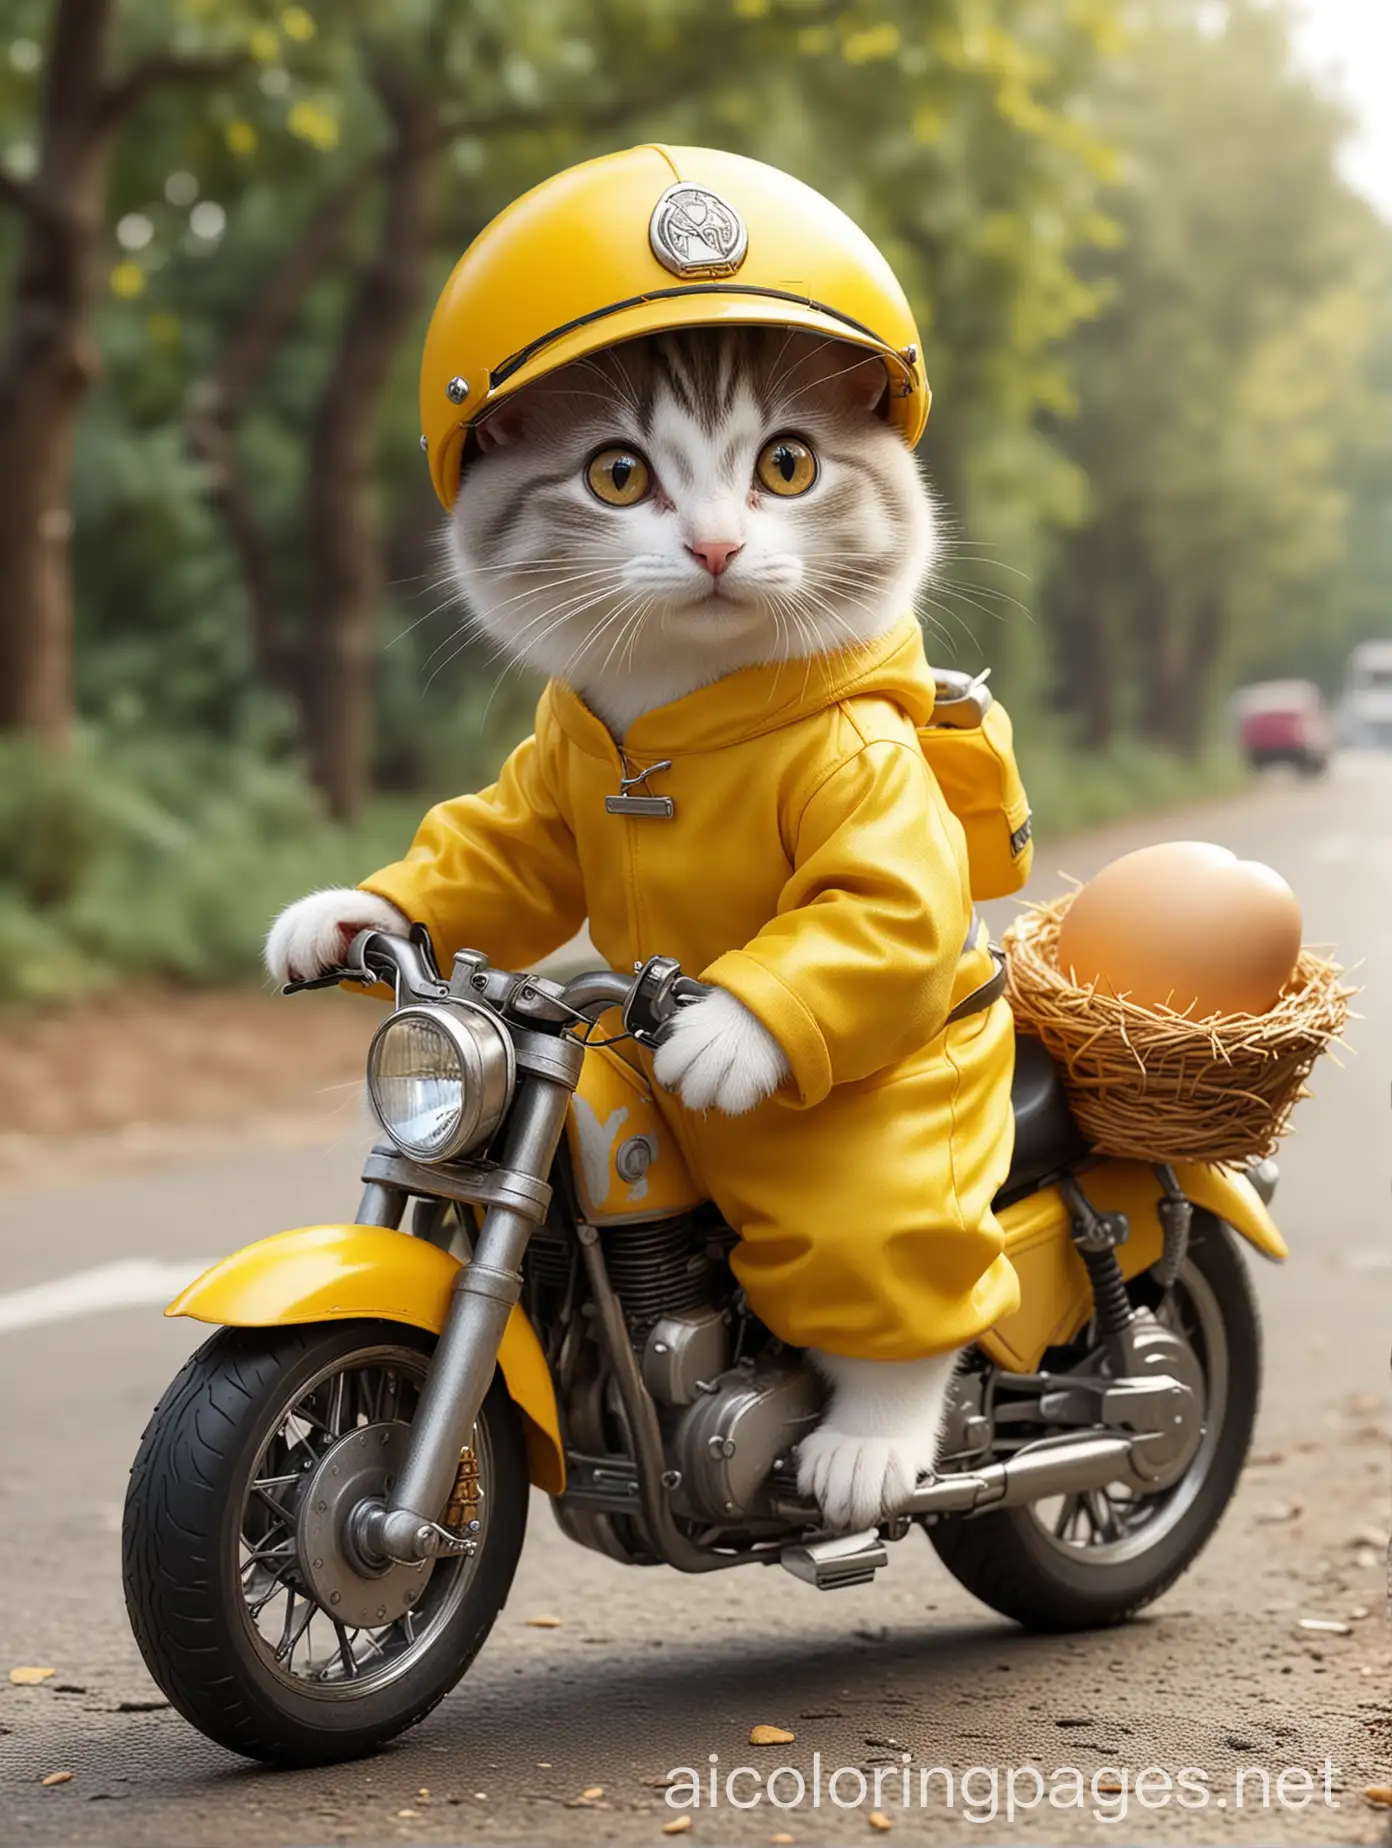 The smallest mouse in the world, a super mini kitten, this cat is a takeaway worker, has beautiful eyes, wearing a yellow takeaway costume, riding a motorcycle, road background, anthropomorphic, photo real, photo real, classic composition, masterpiece, exquisite, color correction, amazing visual effects, crazy details, intricate details, sharp focus, hd, 32k
One day, he found a golden egg in his chicken's nest.



, Coloring Page, black and white, line art, white background, Simplicity, Ample White Space. The background of the coloring page is plain white to make it easy for young children to color within the lines. The outlines of all the subjects are easy to distinguish, making it simple for kids to color without too much difficulty